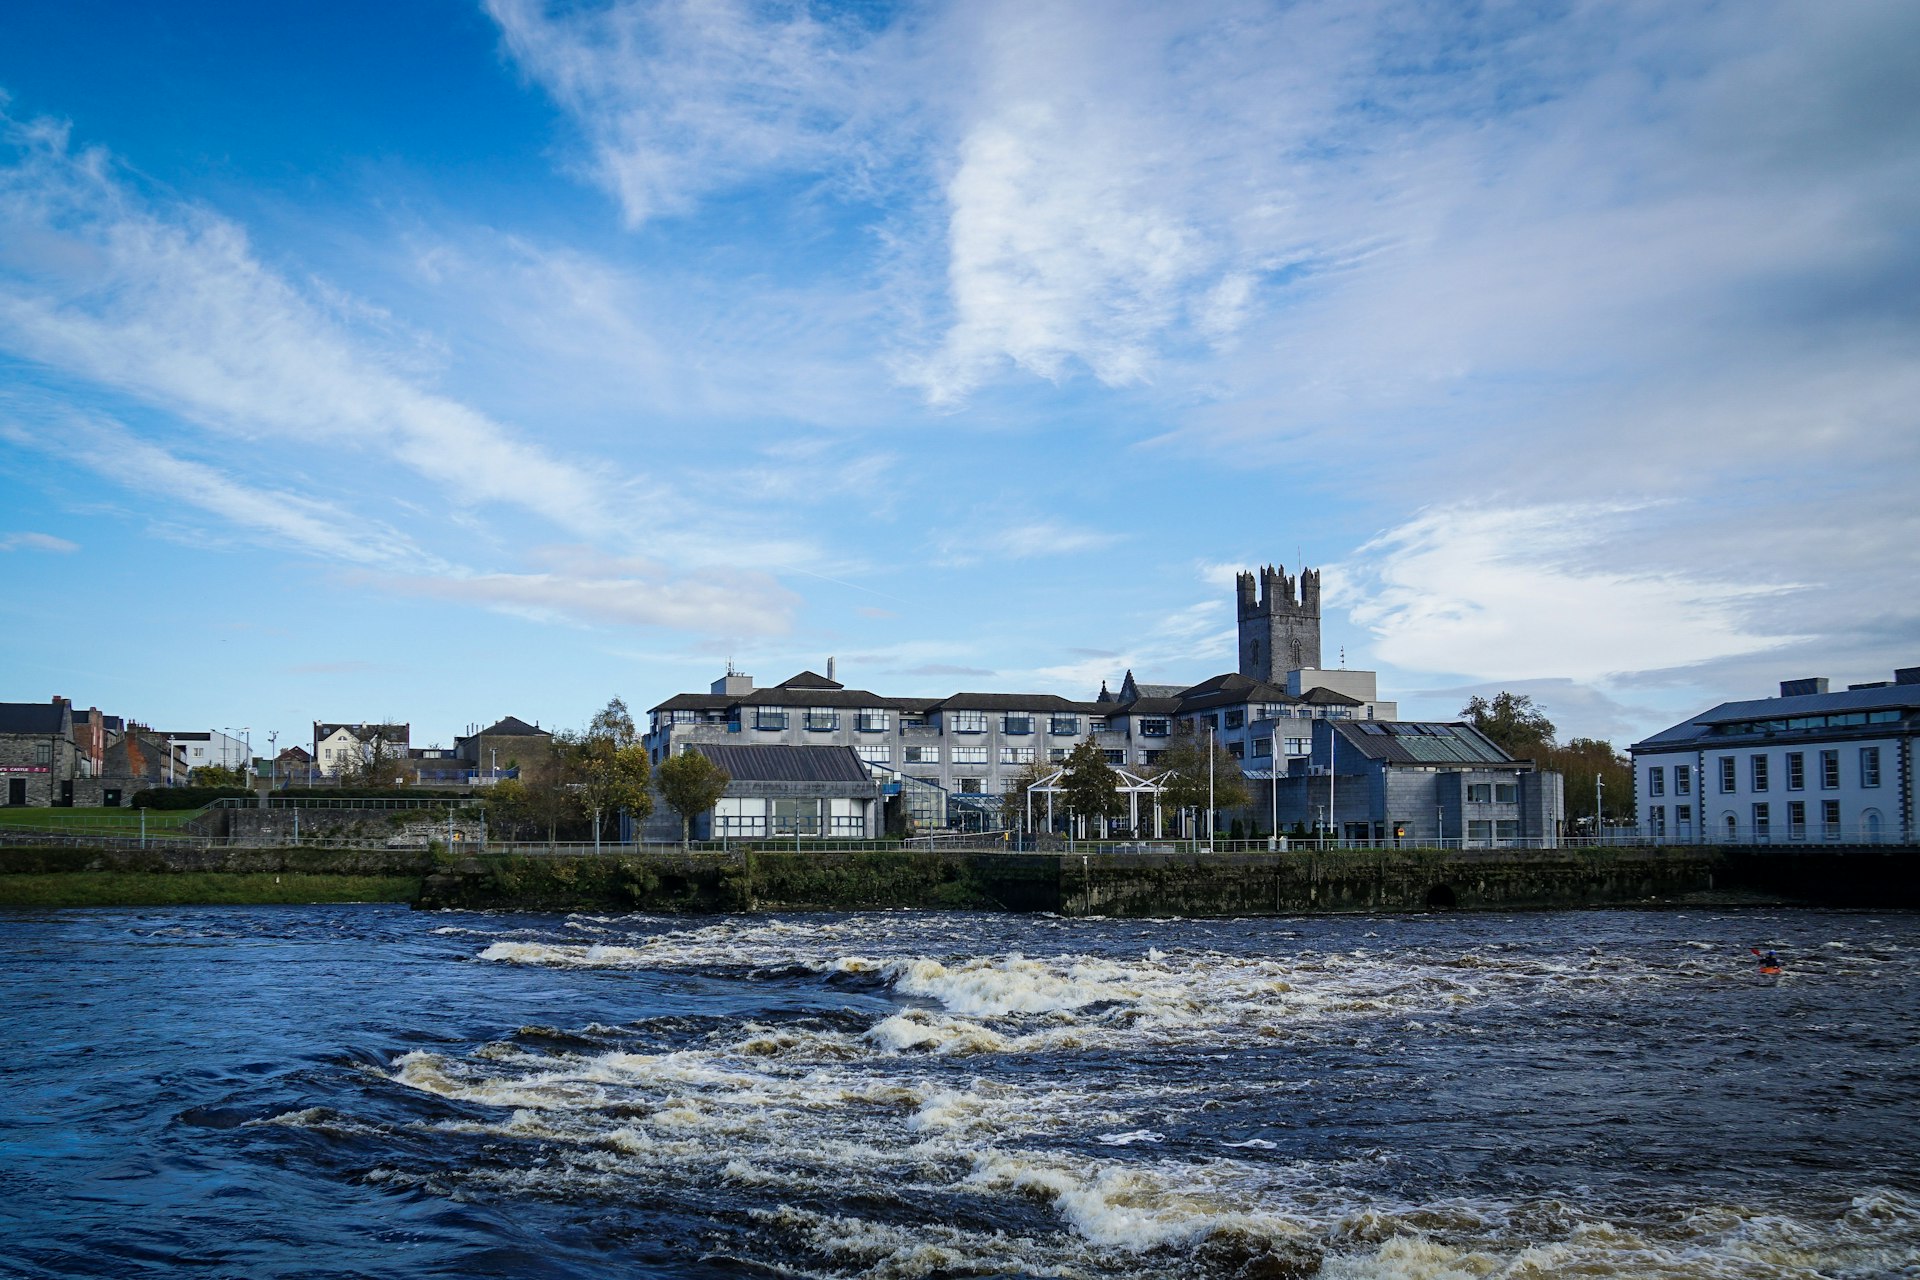 The River Shannon is a deep blue and crested with low, white foamy waves as it laps against the shore where the city and King John's Castle sit